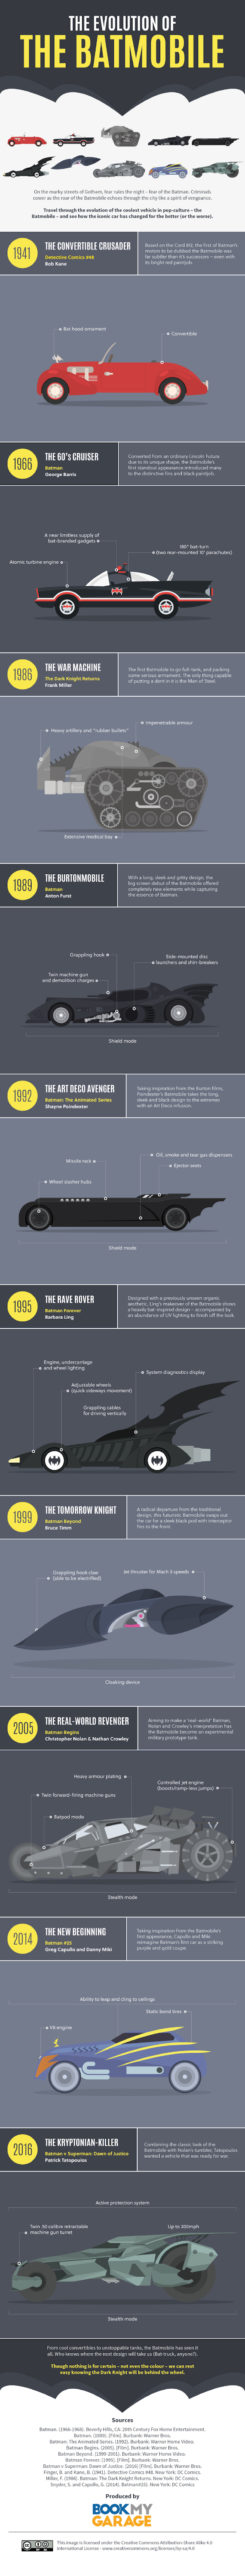 Infographic: The Evolution Of The Batmobile